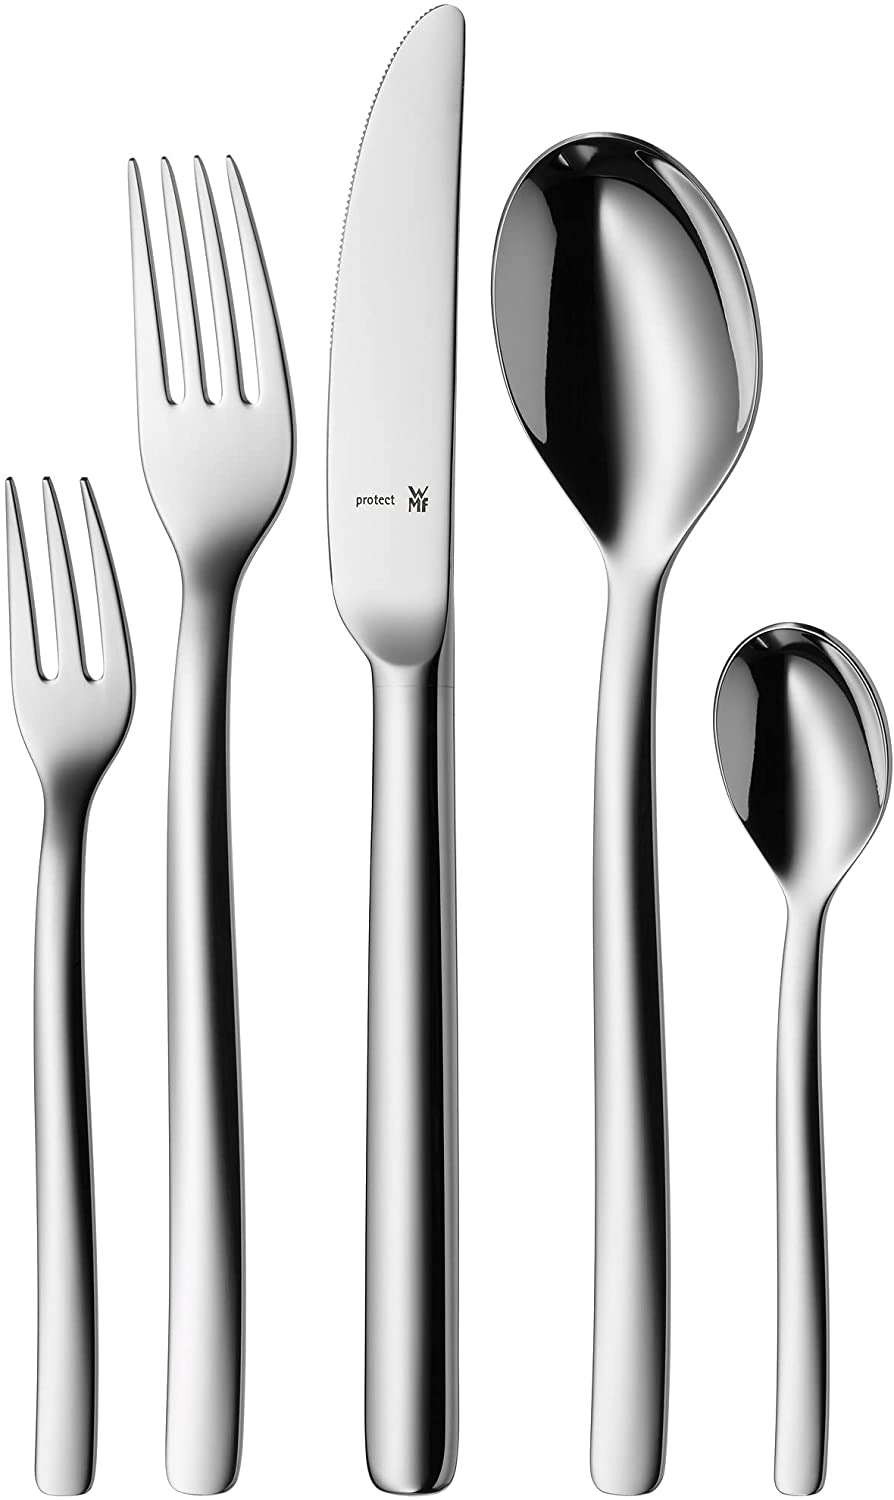 WMF Atic Stainless Steel Cutlery Set for 6 People, Cutlery Set 30 Pieces, Monobloc Knife, Cromargan Protect Polished, Scratch-Resistant, Dishwasher Safe